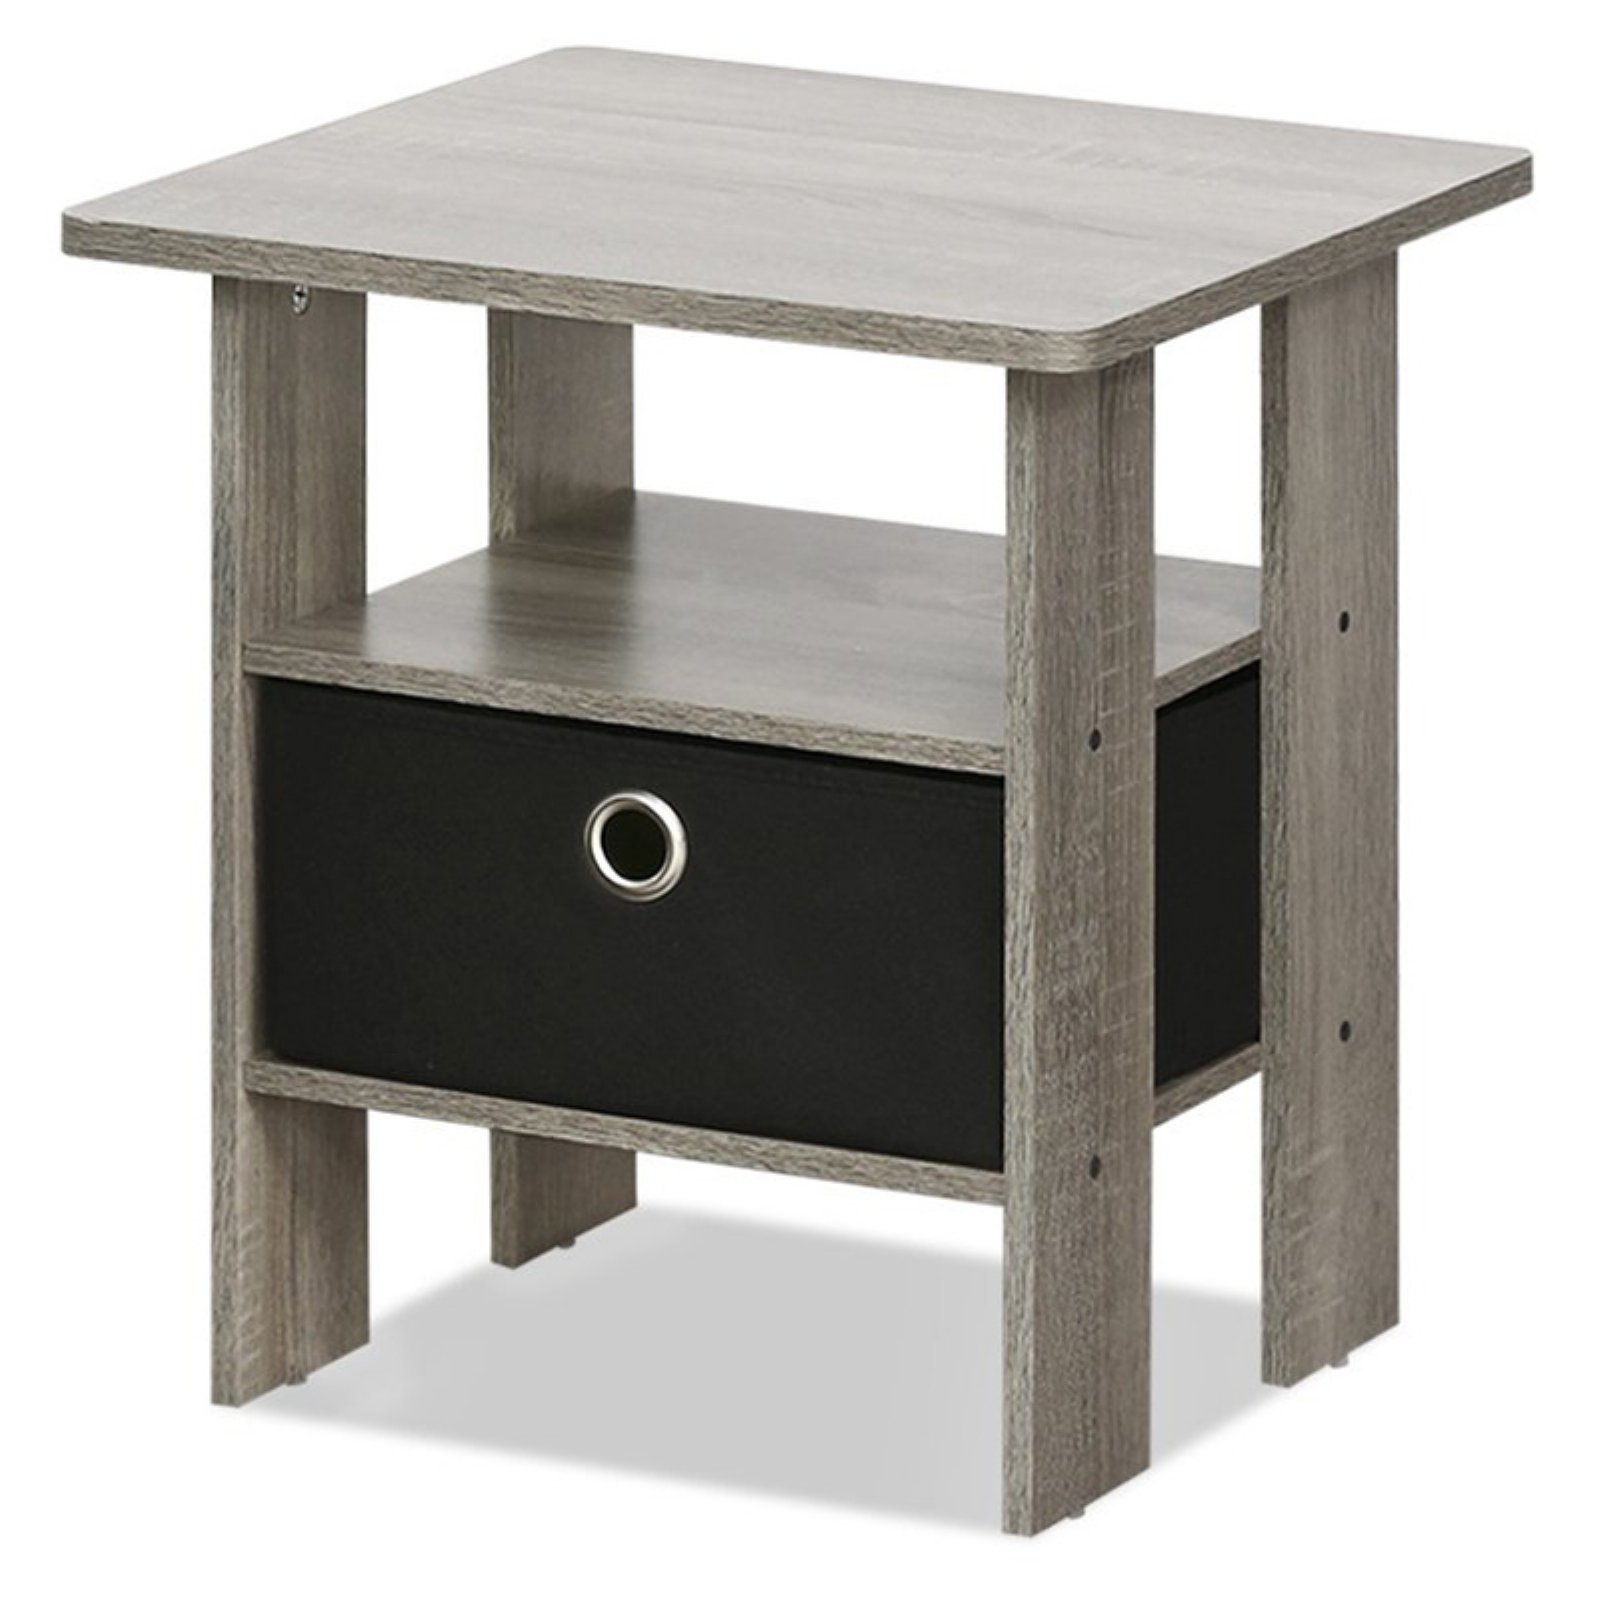 Furinno Andrey Engineered Wood End Table with Bin Drawer in Steam Beech/Natural - image 3 of 7